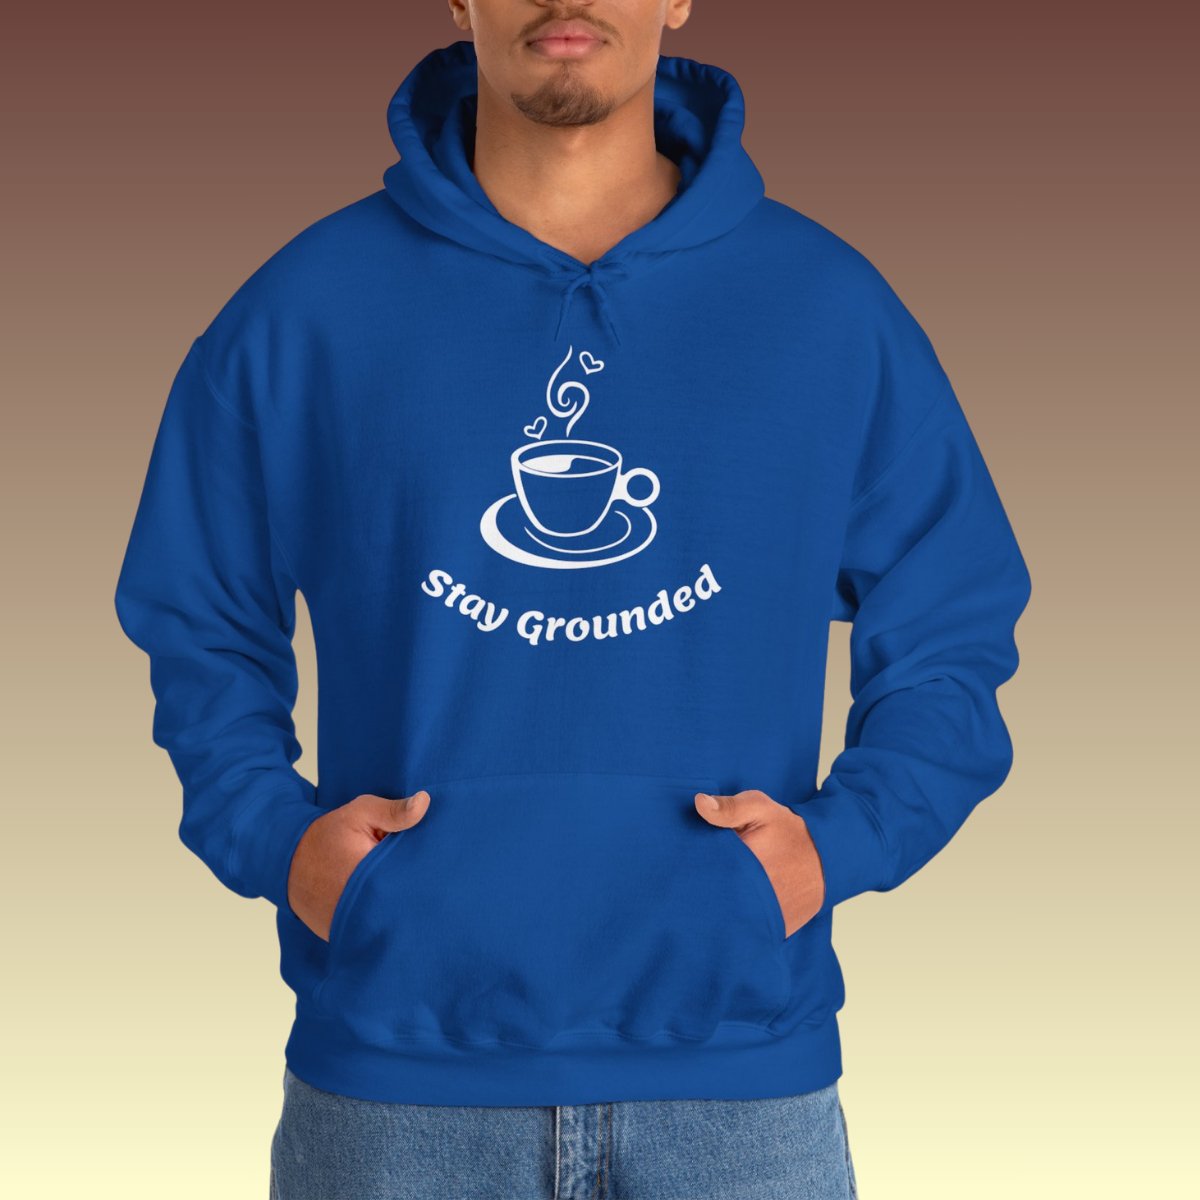 Stay Grounded Hoodie - Coffee Purrfection